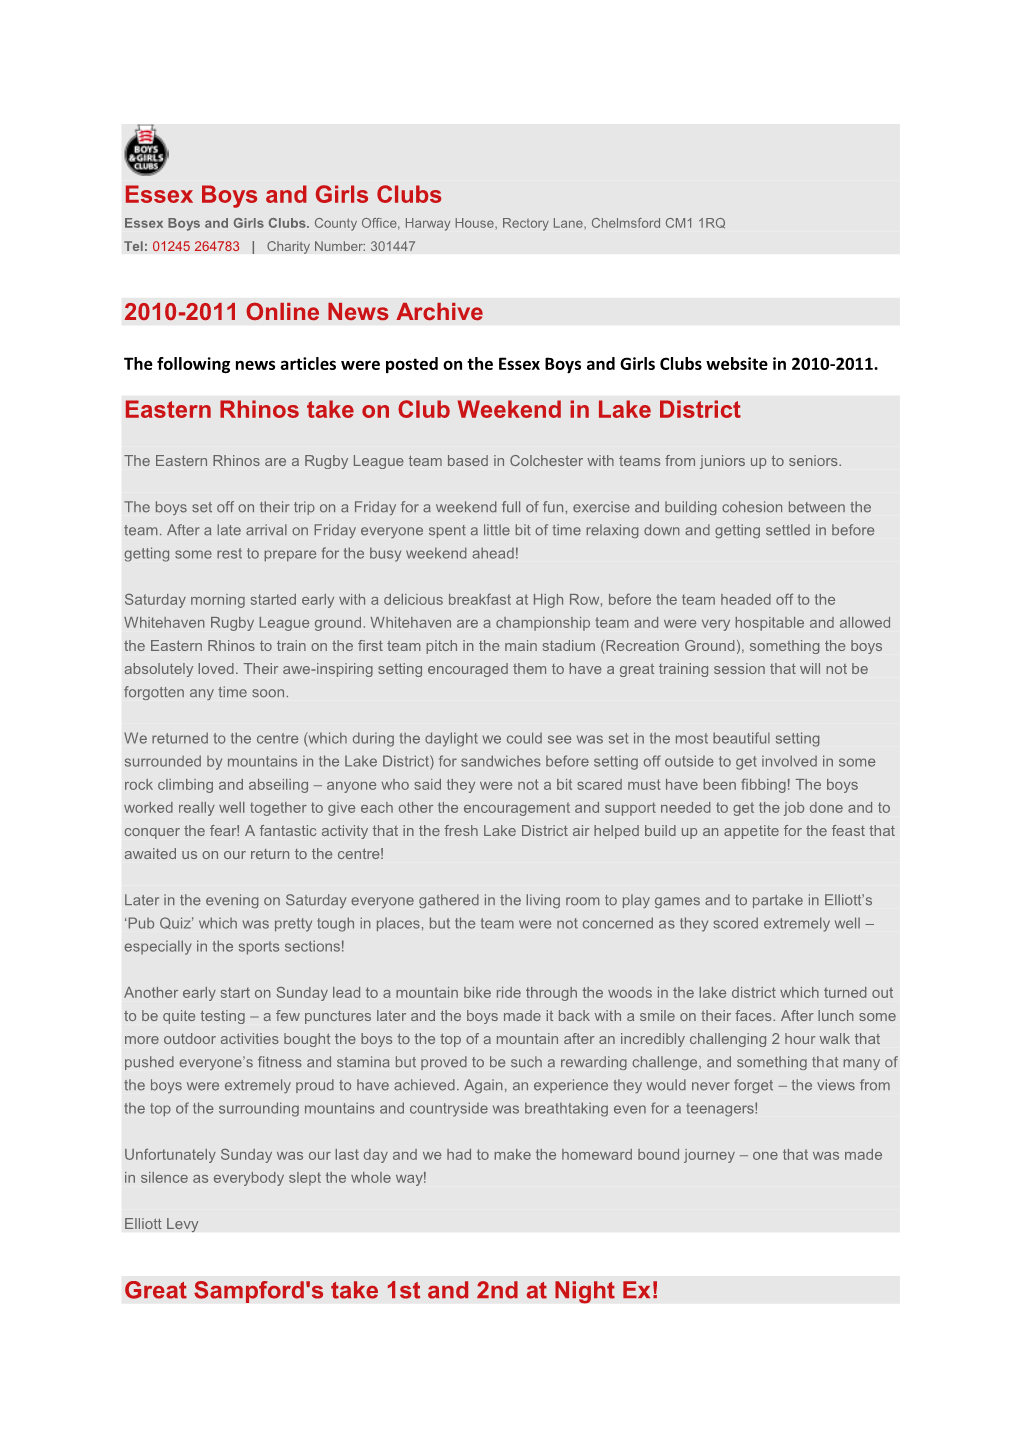 Essex Boys and Girls Clubs 2010-2011 Online News Archive